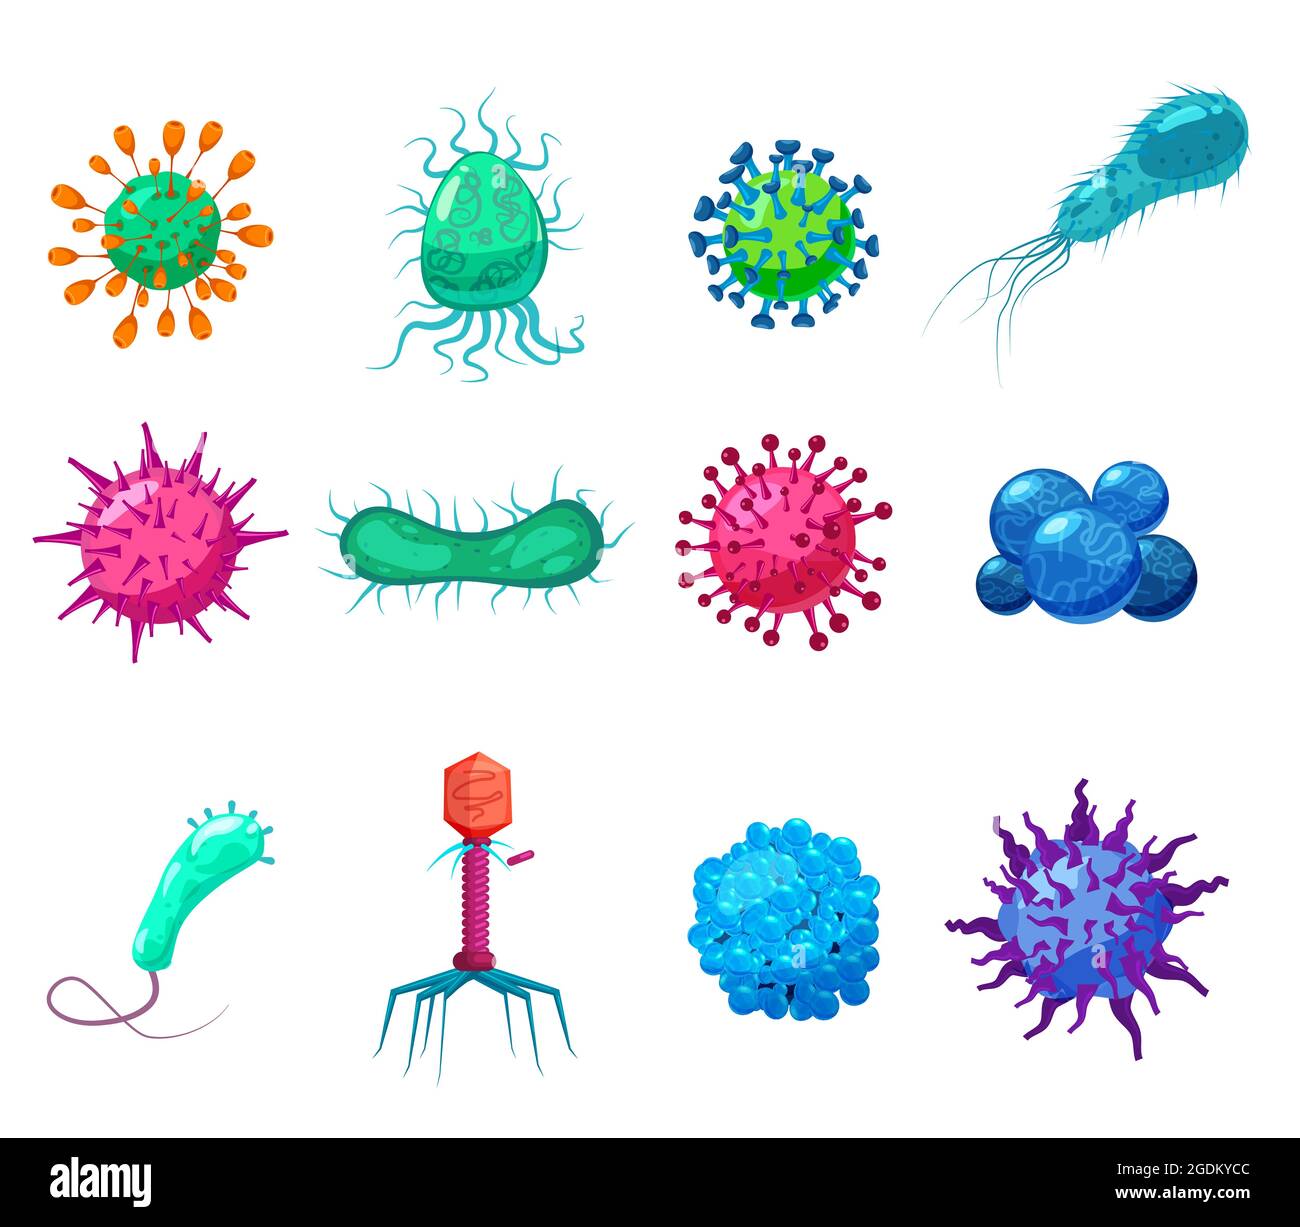 Set Viruses bacterias germs microorganisms disease-causing objects pandemic microbes, fungi infection. Vector isolated illustration cartoon style icon Stock Vector